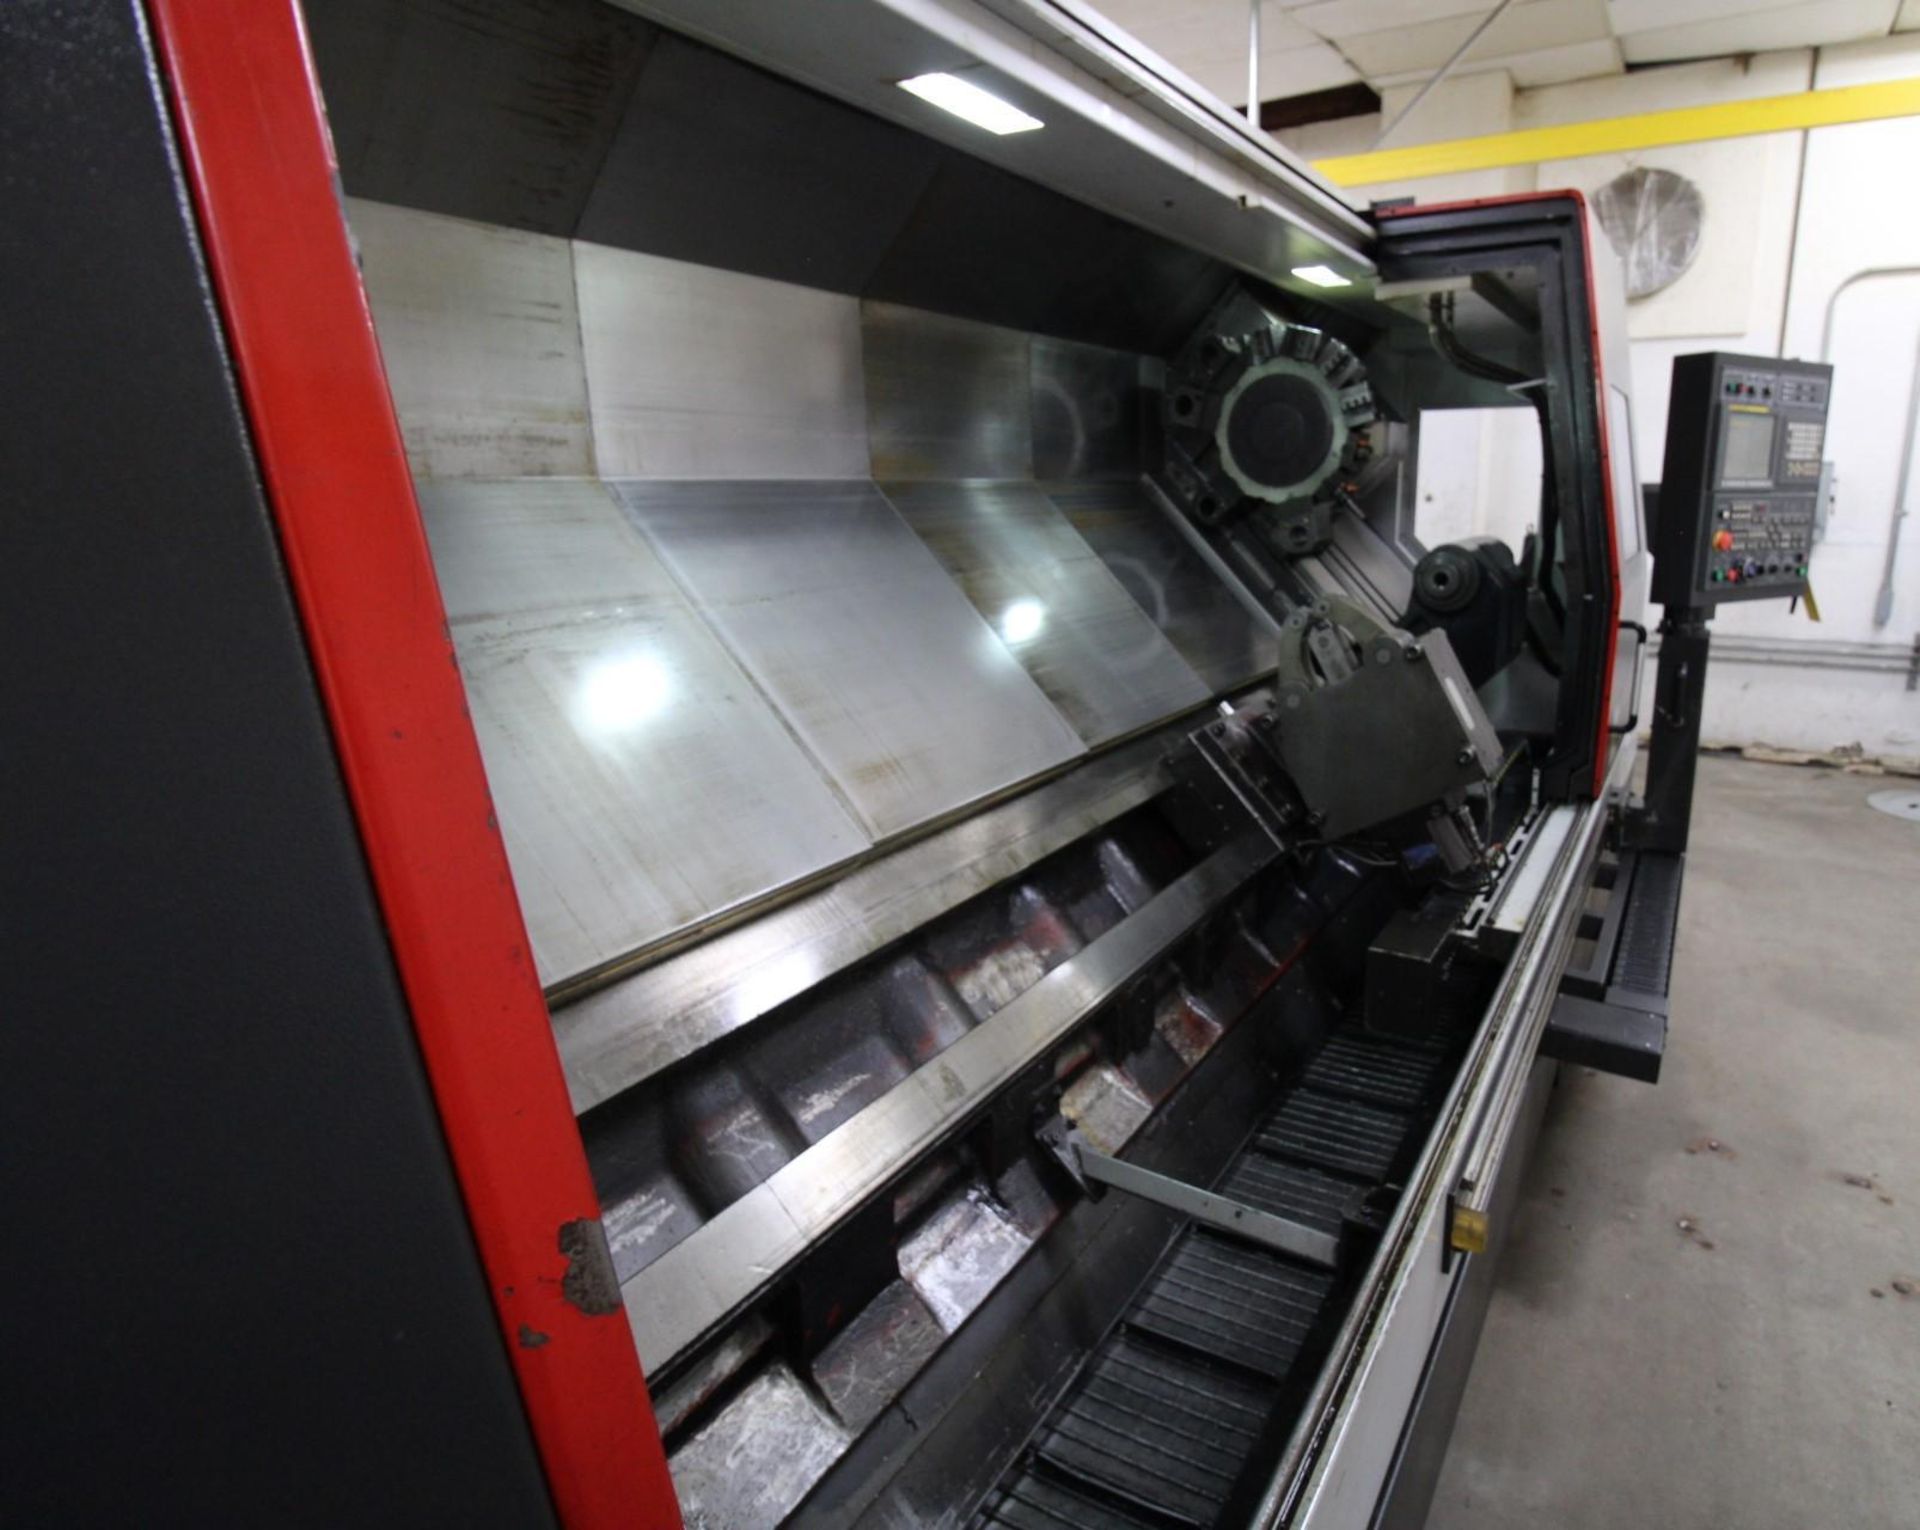 MULTI AXIS CNC MILLING & TURNING CENTER, SAMSUNG MDL. SL-45MC/3000, new 2014, Fanuc Oi-TD control, - Image 13 of 16